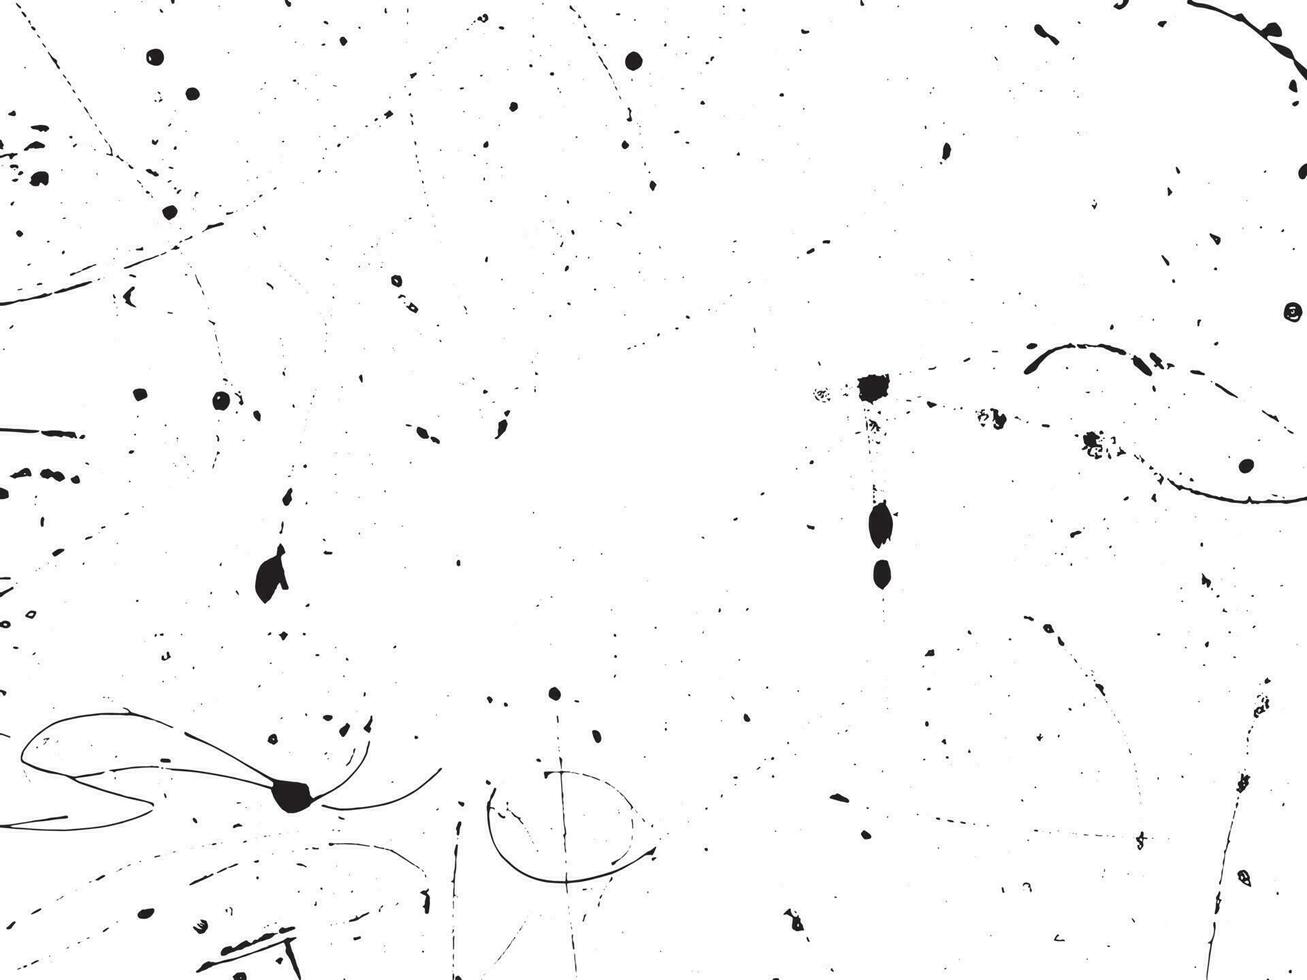 Grunge background vector illustration. Black and white messy texture with scratches and dots. Distressed overlay effect for retro design. Abstract dirty surface with empty space. EPS10.